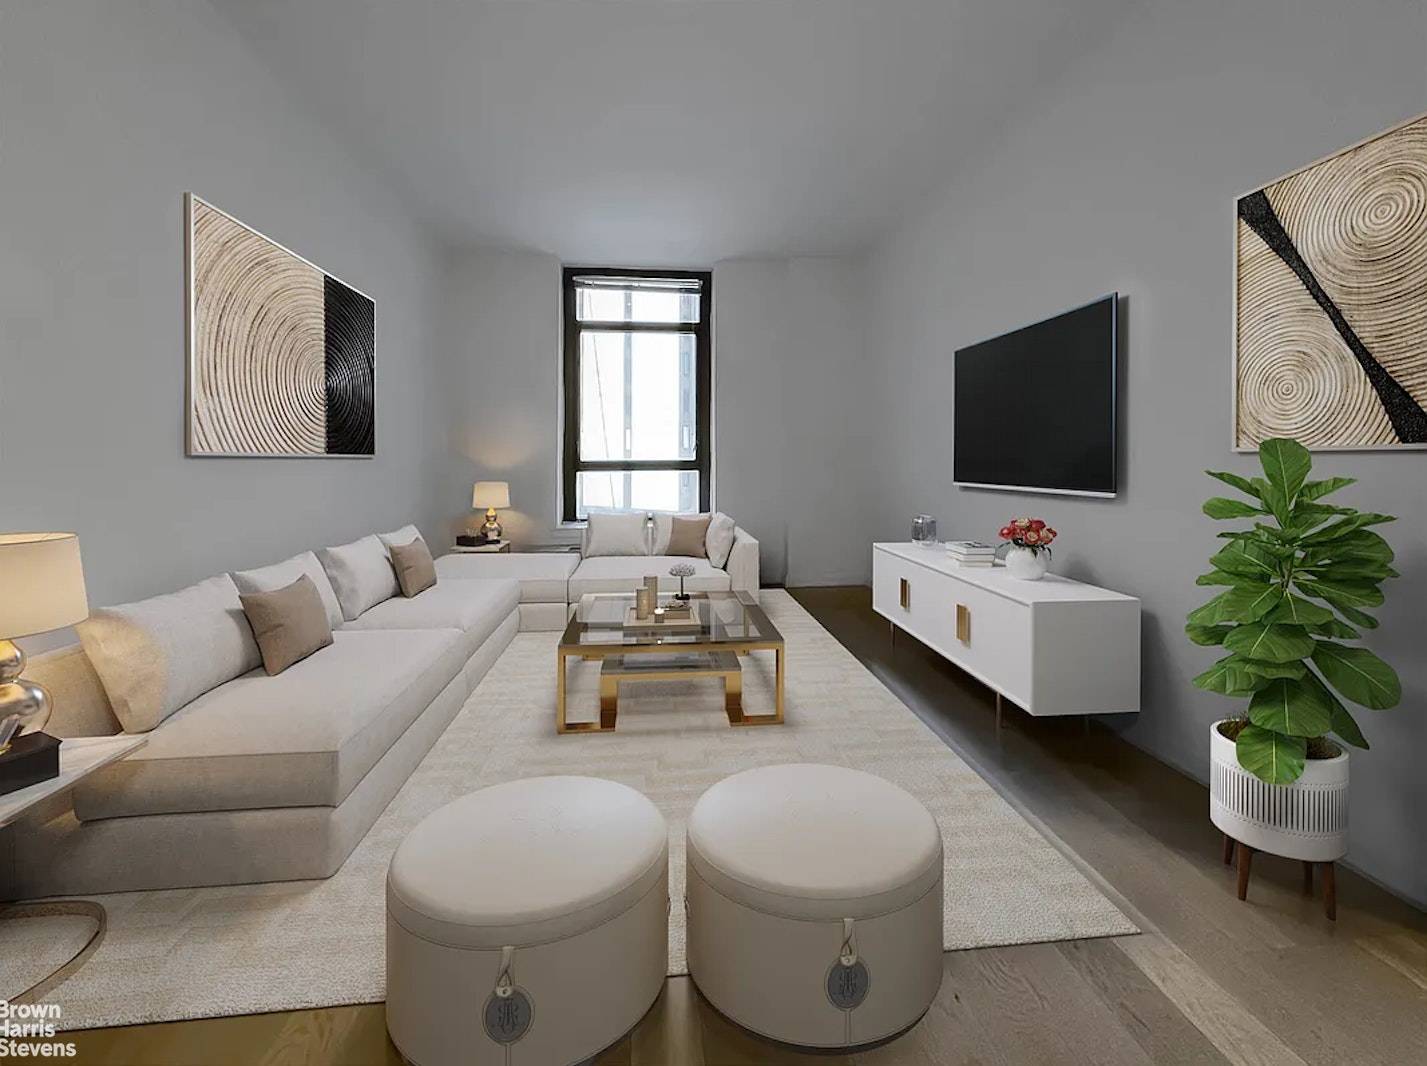 Fully renovated, spacious one bedroom apartment in Murray Hill.